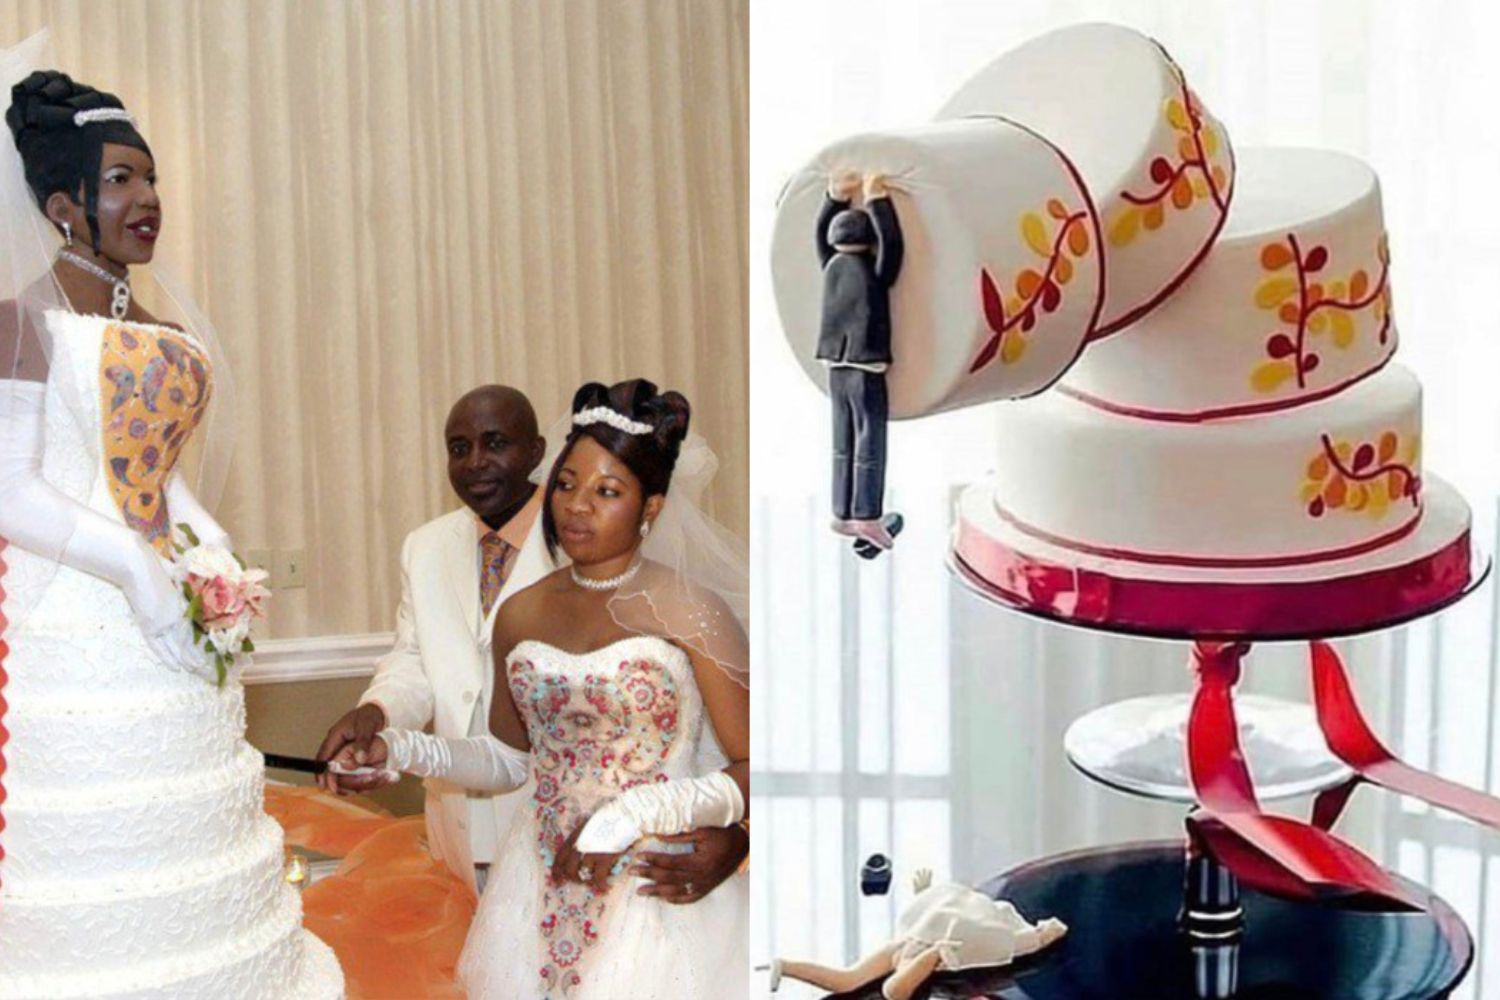 Is It Ever Okay to Smash Wedding Cake in the Bride's Face?